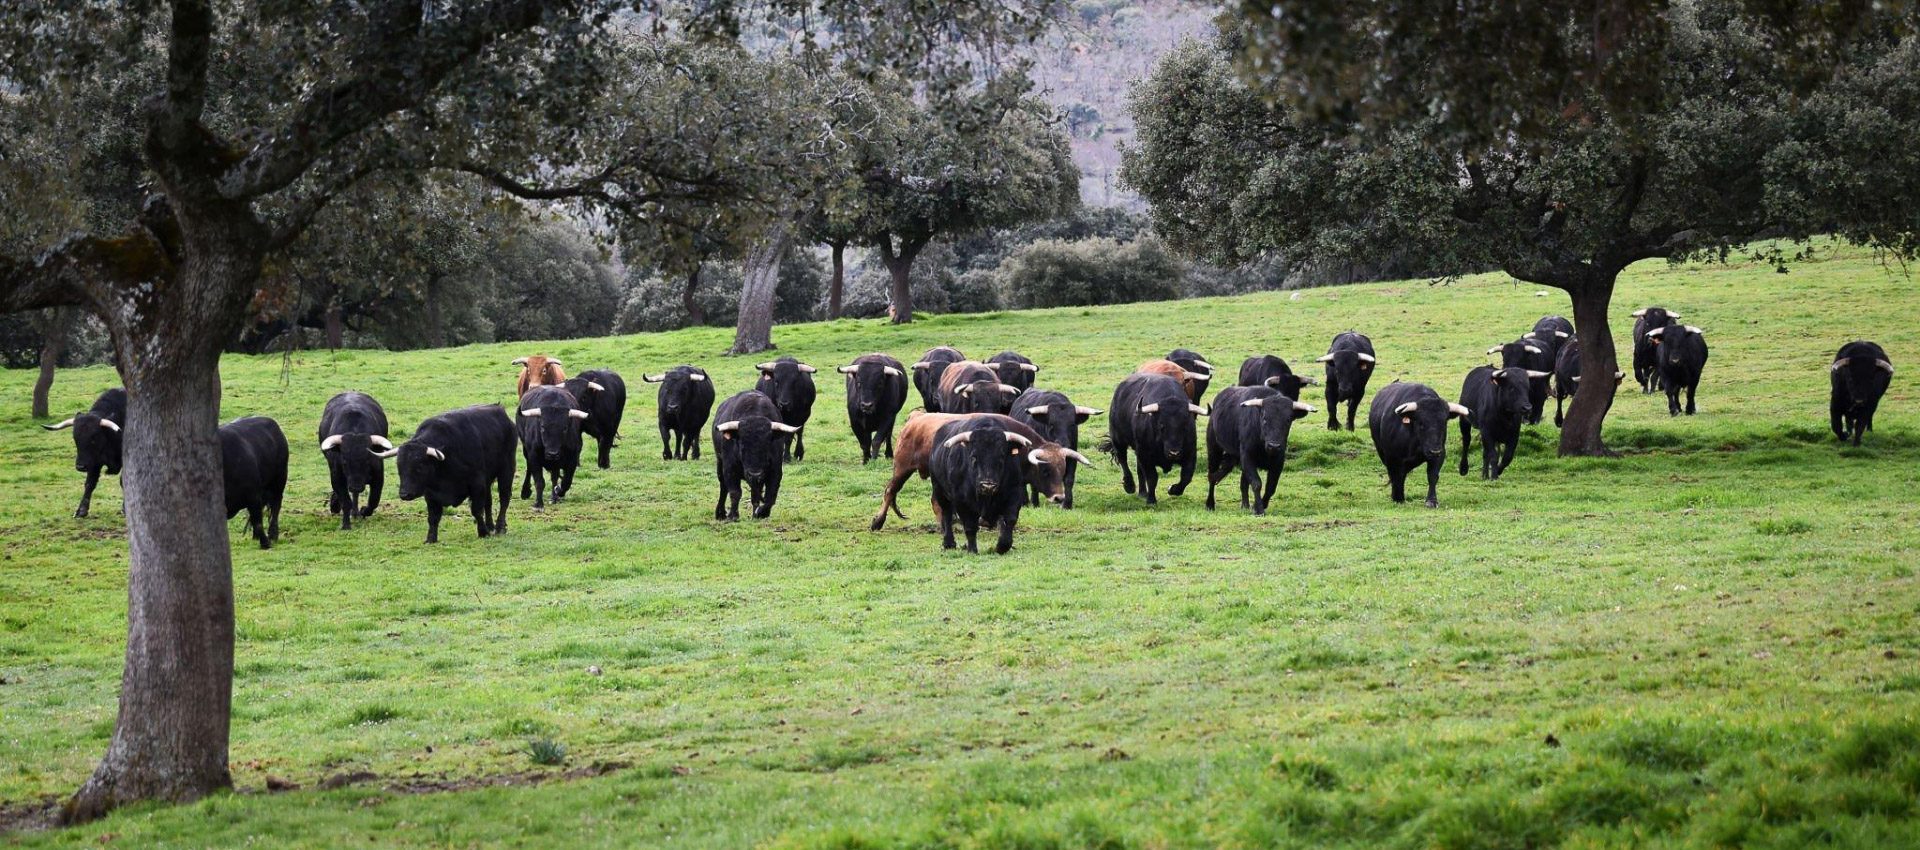 Green valley with the herd of grazing bulls in the fields of Seville that you would see in our visit.